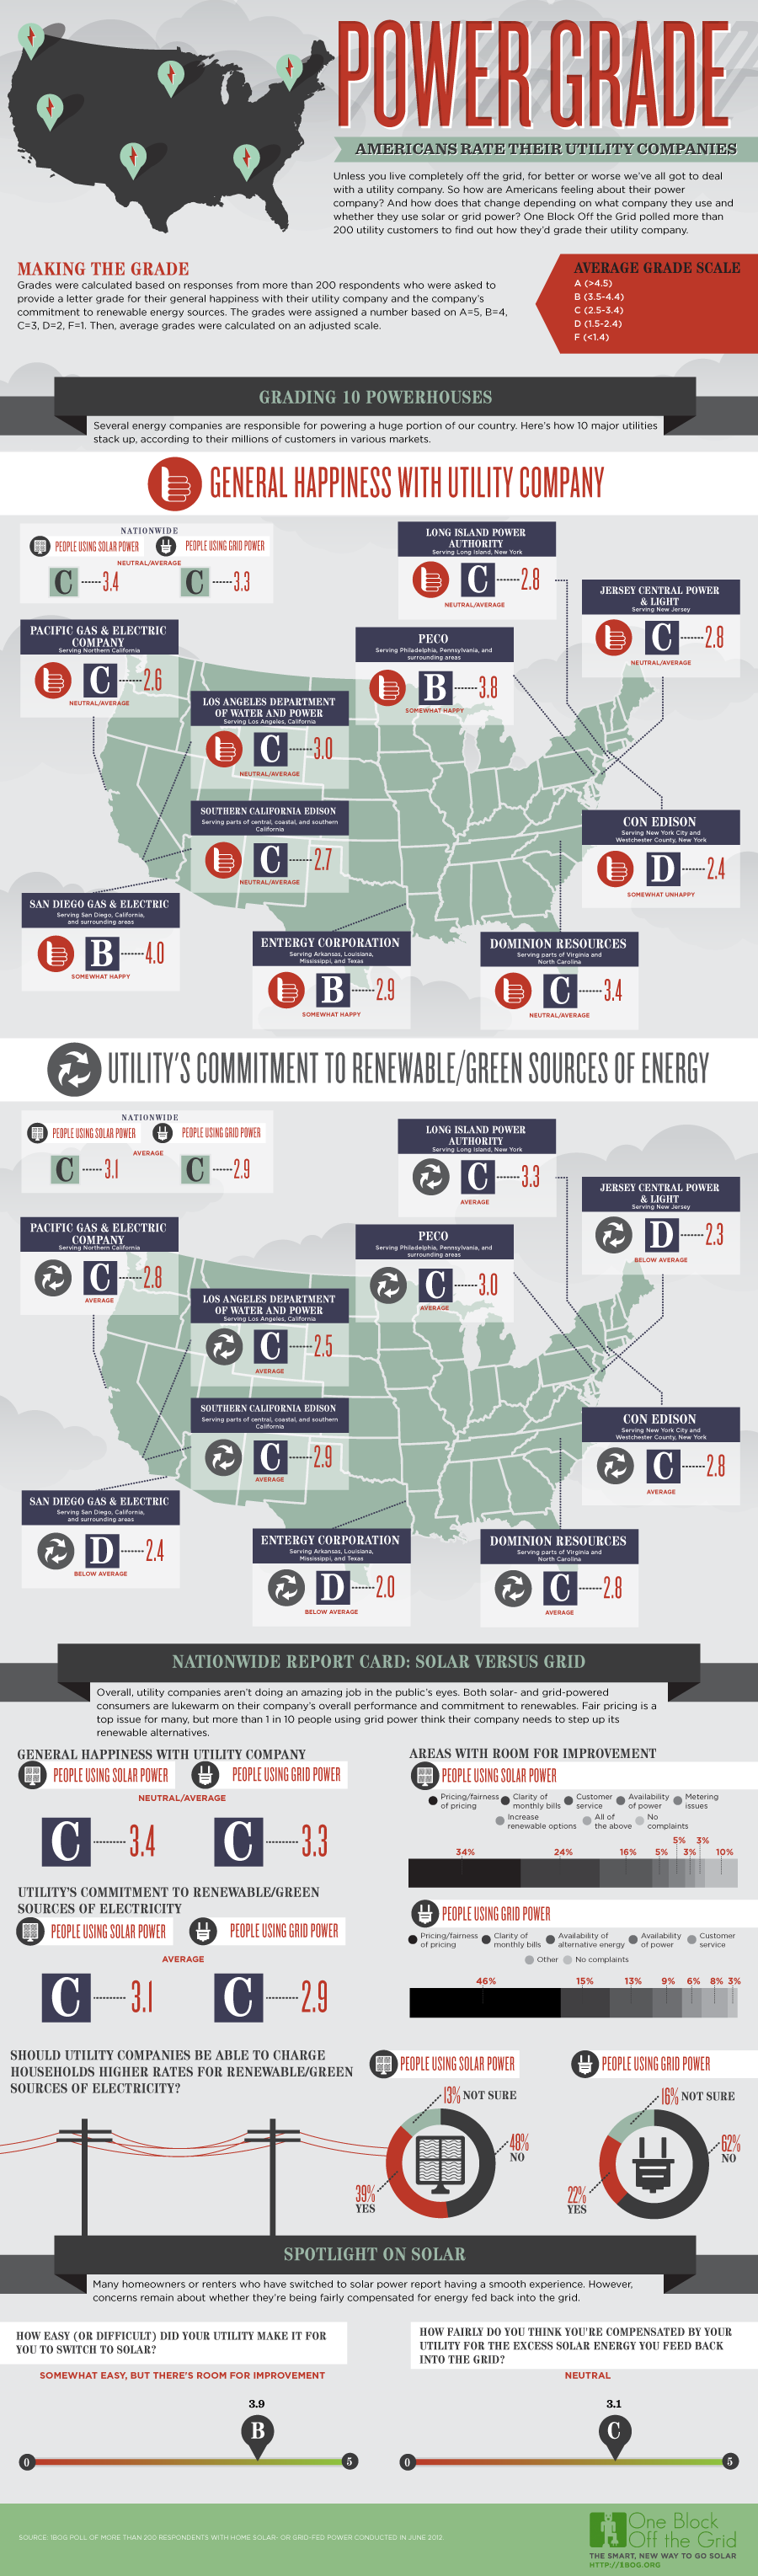 American Utility Companies-infographic